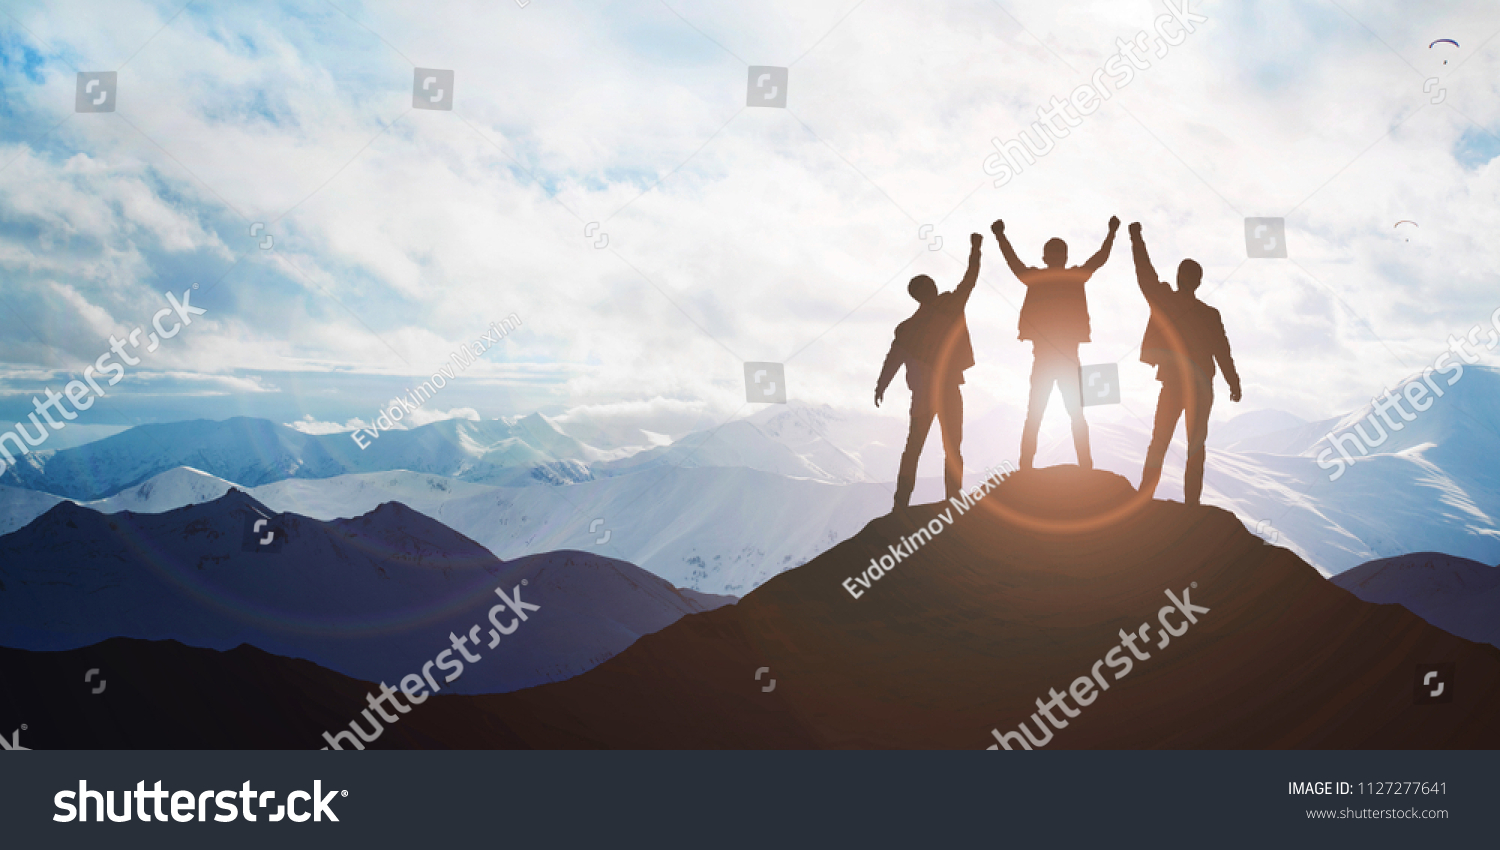 Silhouette of the team on the mountain. Leadership Concept #1127277641